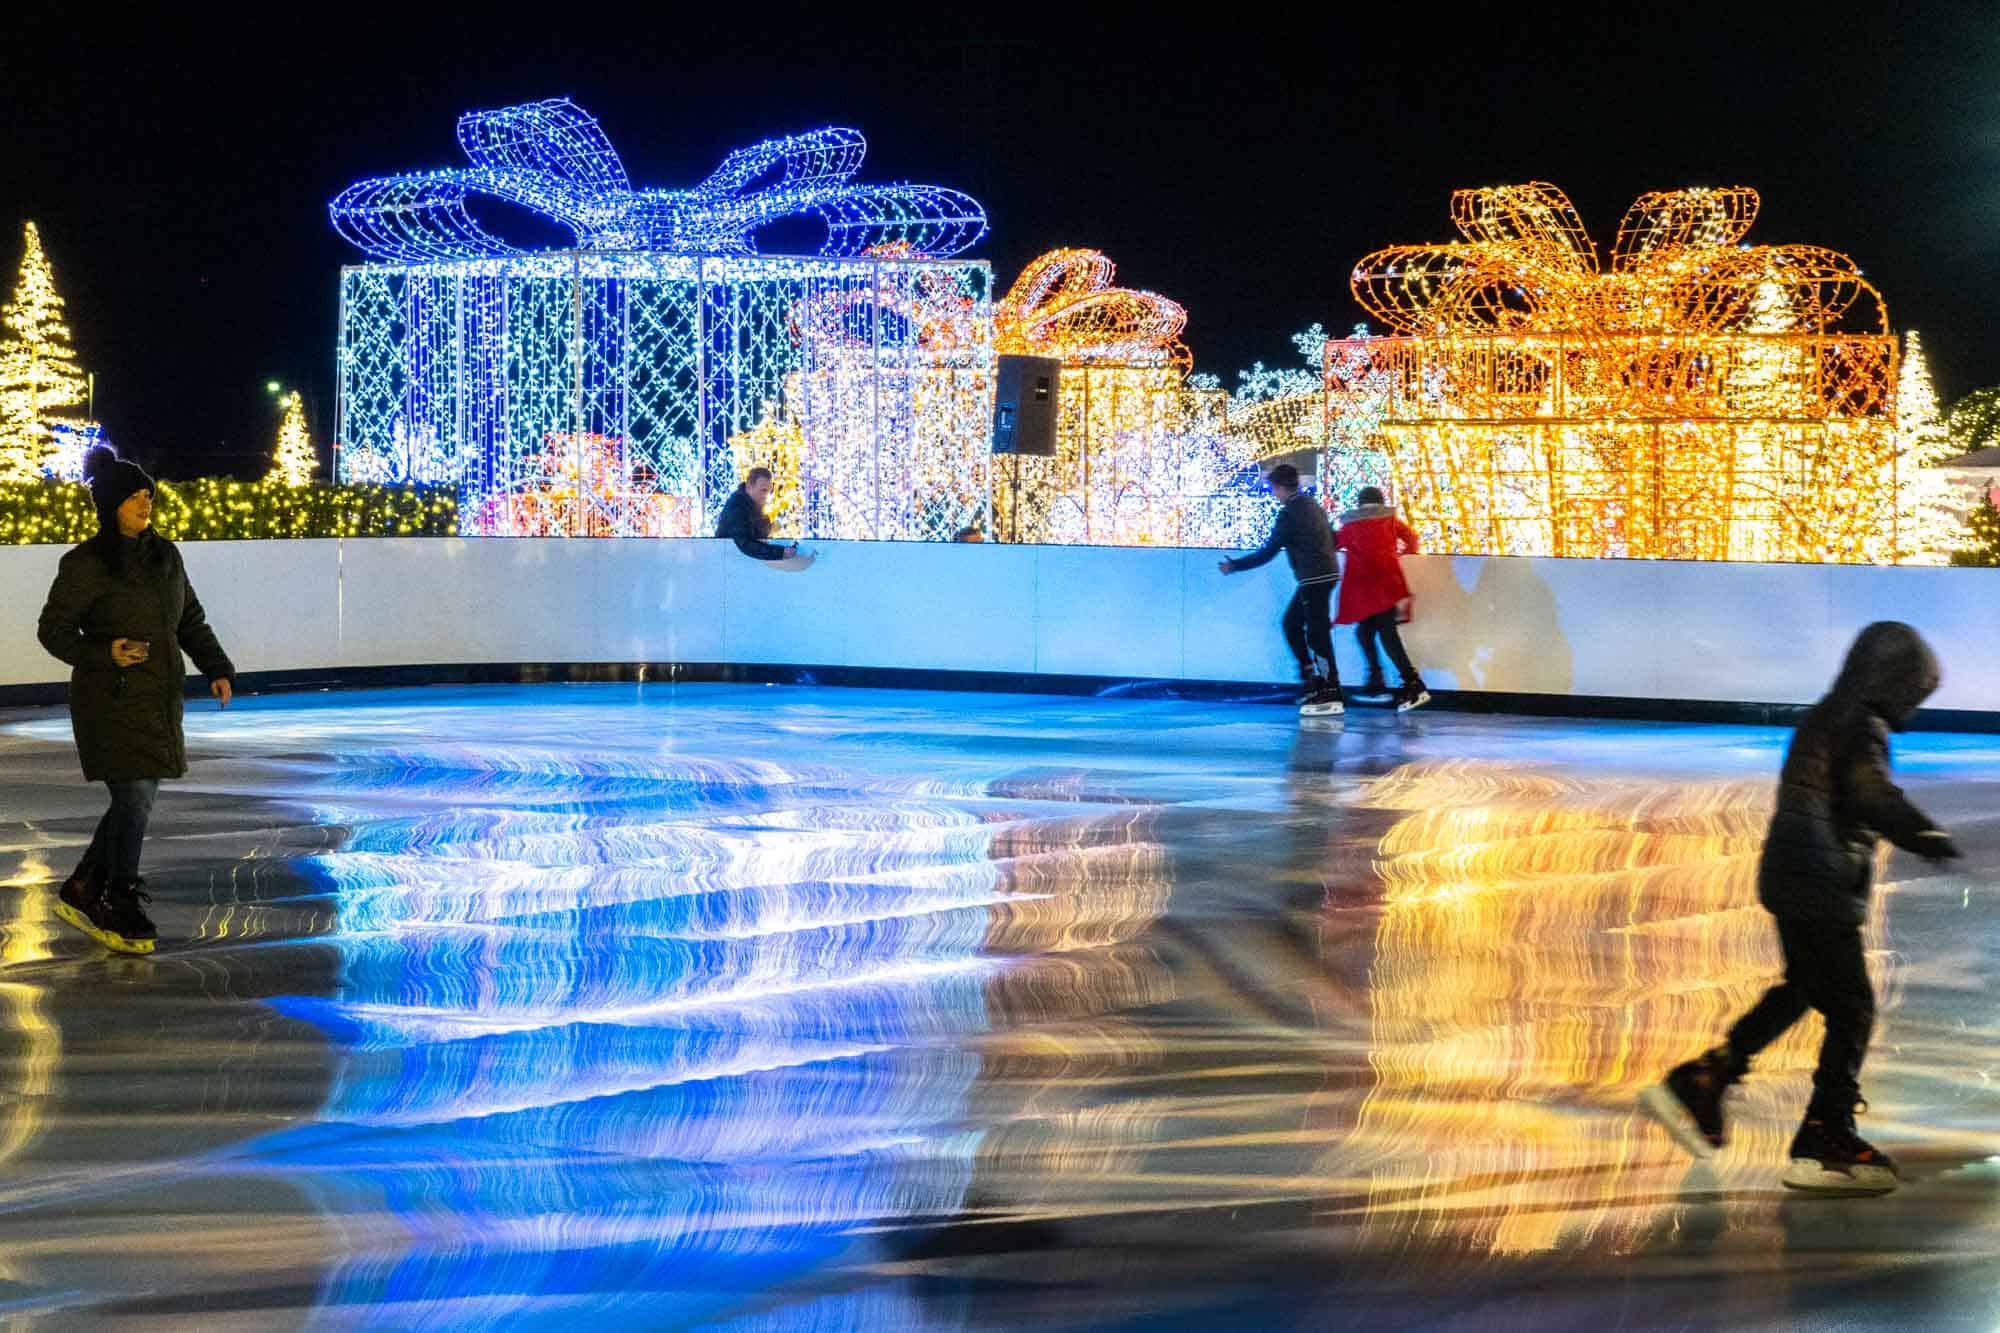 People ice skating at holiday event